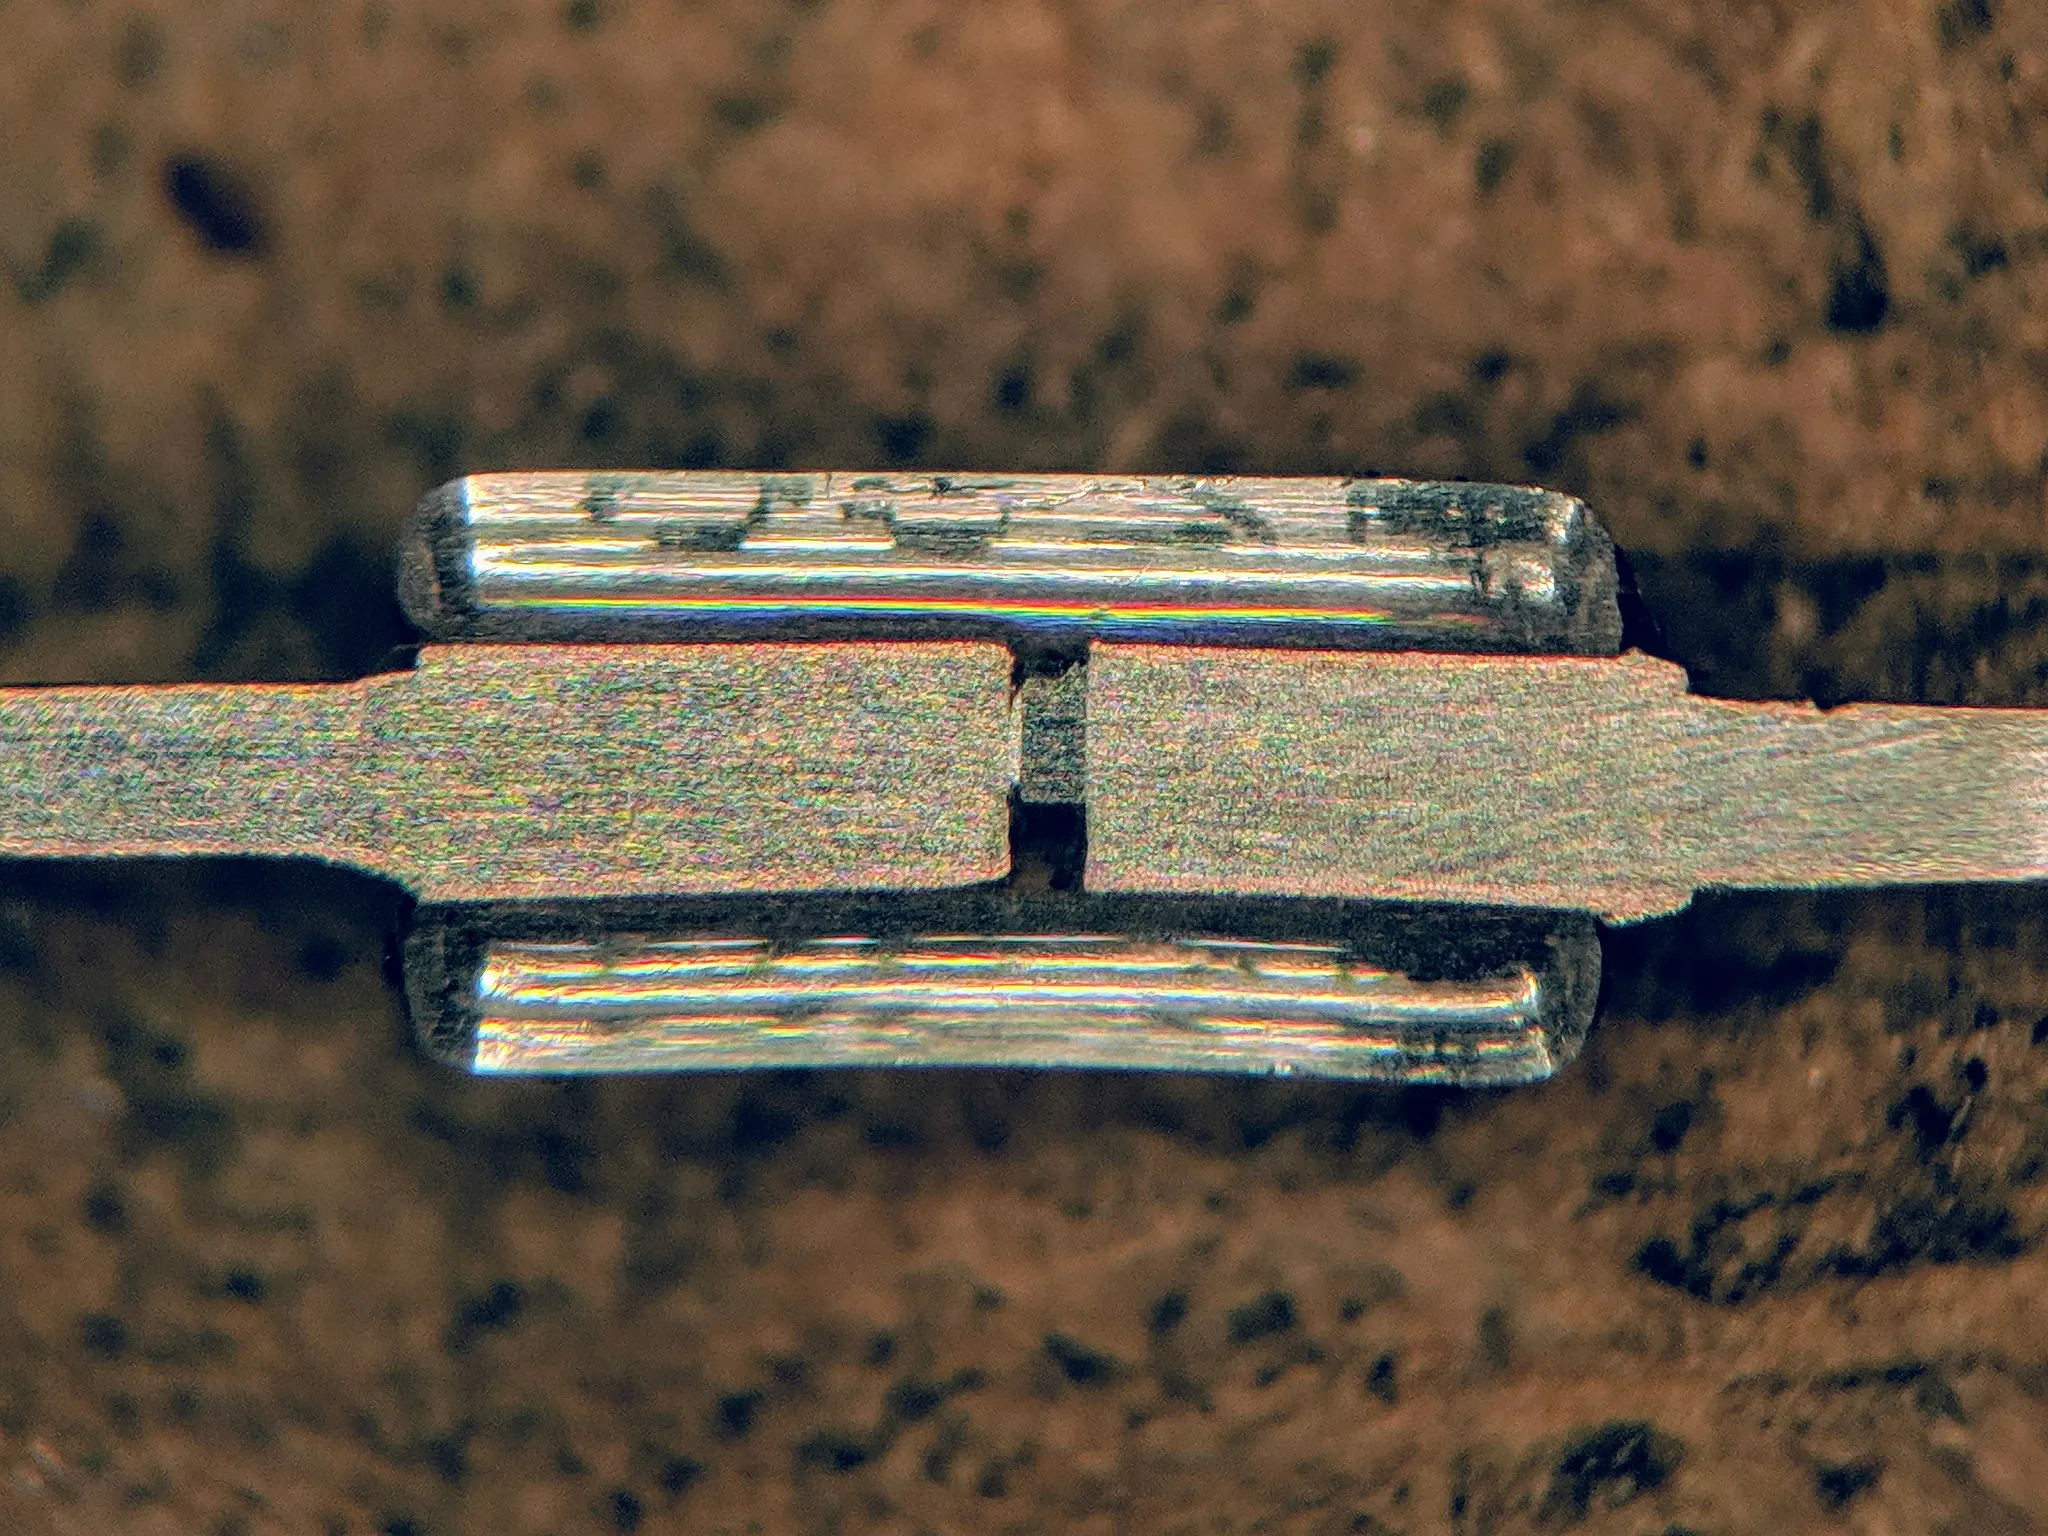 Photo showing: Cross section of a glass 1N914 diode